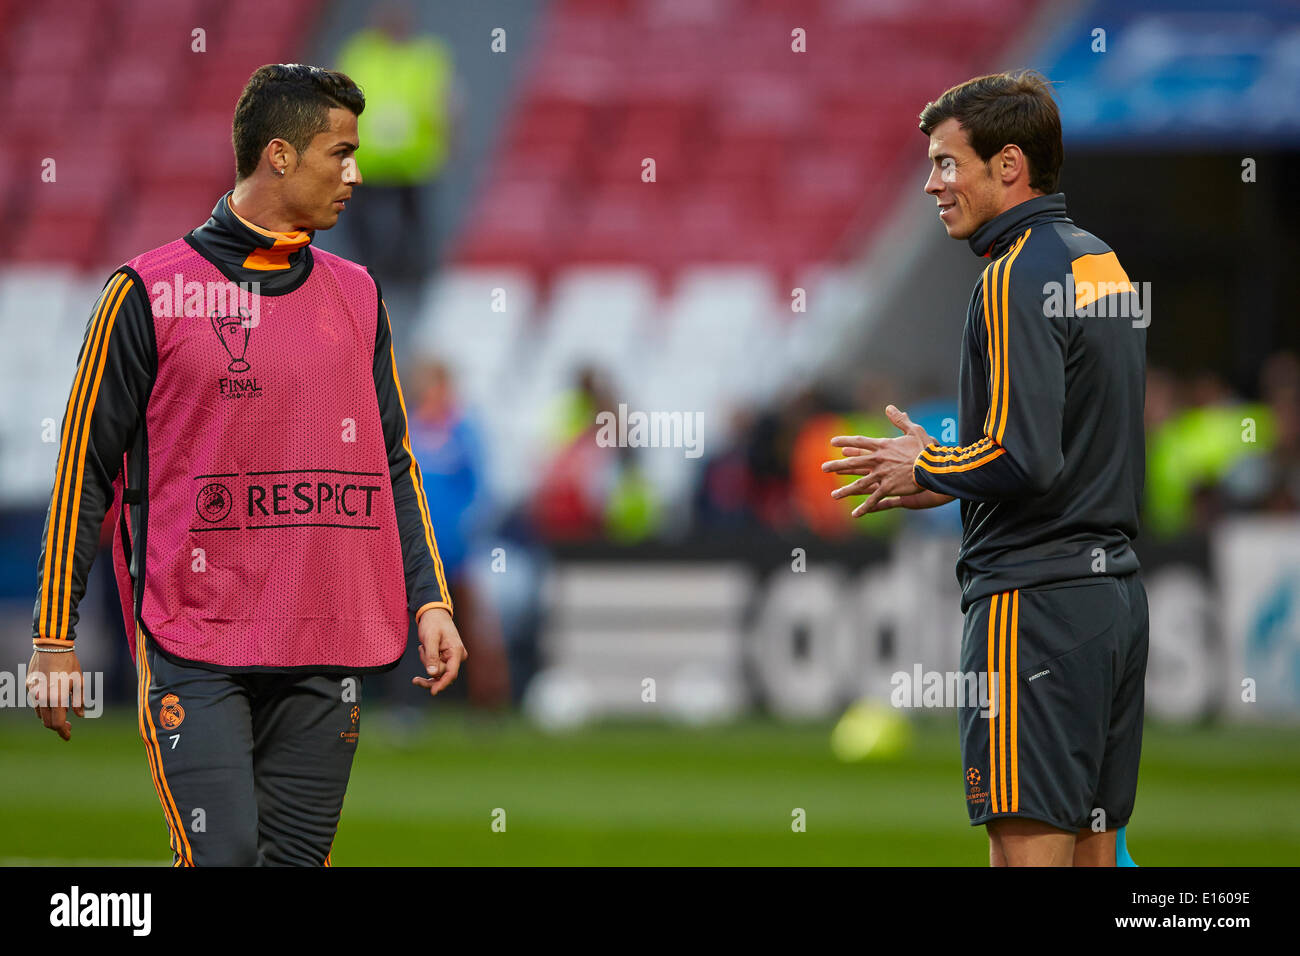 23.05.2014, Lisbon, Portugal Midfielder Cristiano Ronaldo of Real Madrid shares a joke with Gareth Bale of Real Madrid during the Real Madrid training session prior to the UEFA Champions League final between Real Madrid and Atletico Madrid at Sport Lisboa e Benfica Stadium, Lisbon, Portugal Stock Photo